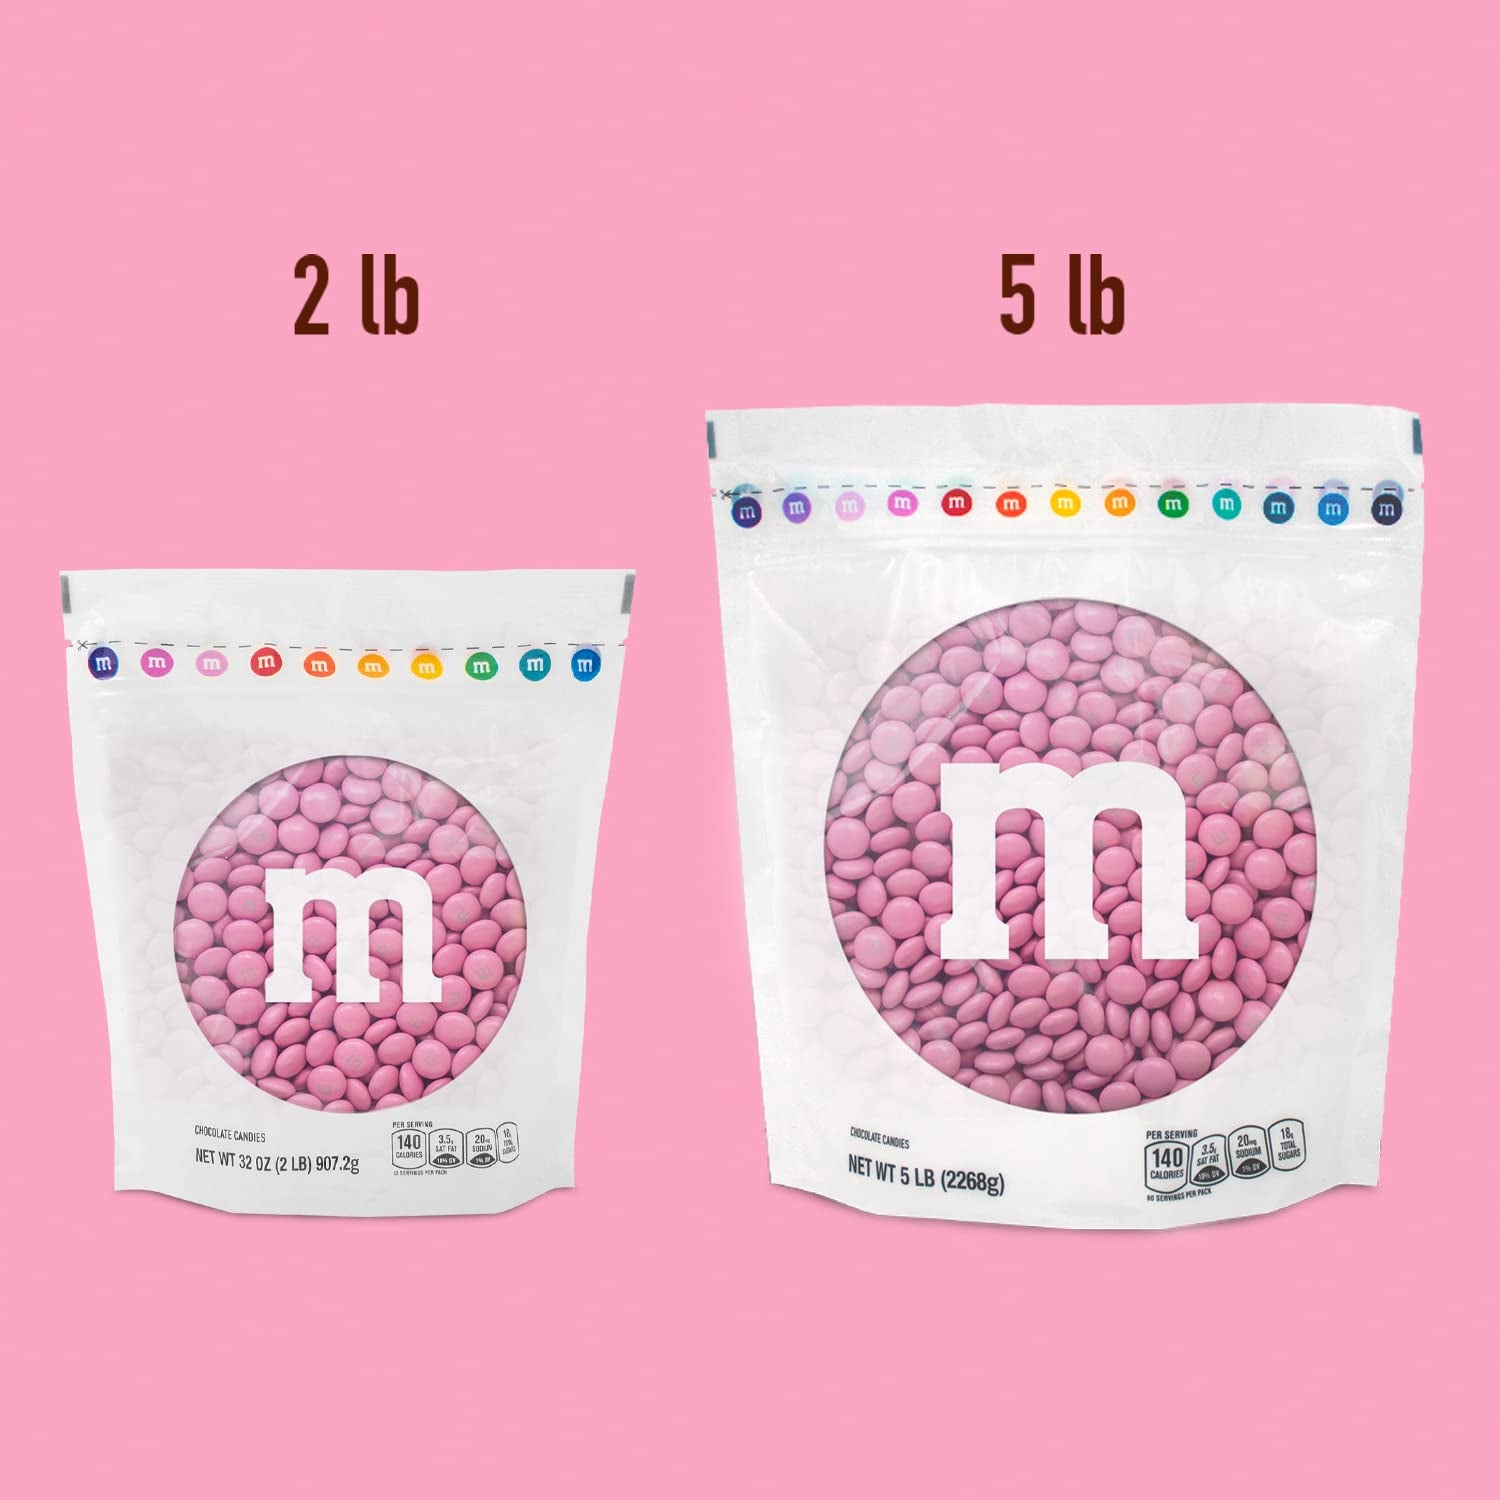 M&M’S Pink Milk Chocolate Candy, 5Lbs of  in Resealable Pack for Candy Bars, Birthdays, Baby Showers, Gender Reveals, It'S a Girl, Dessert Tables & DIY Party Favors